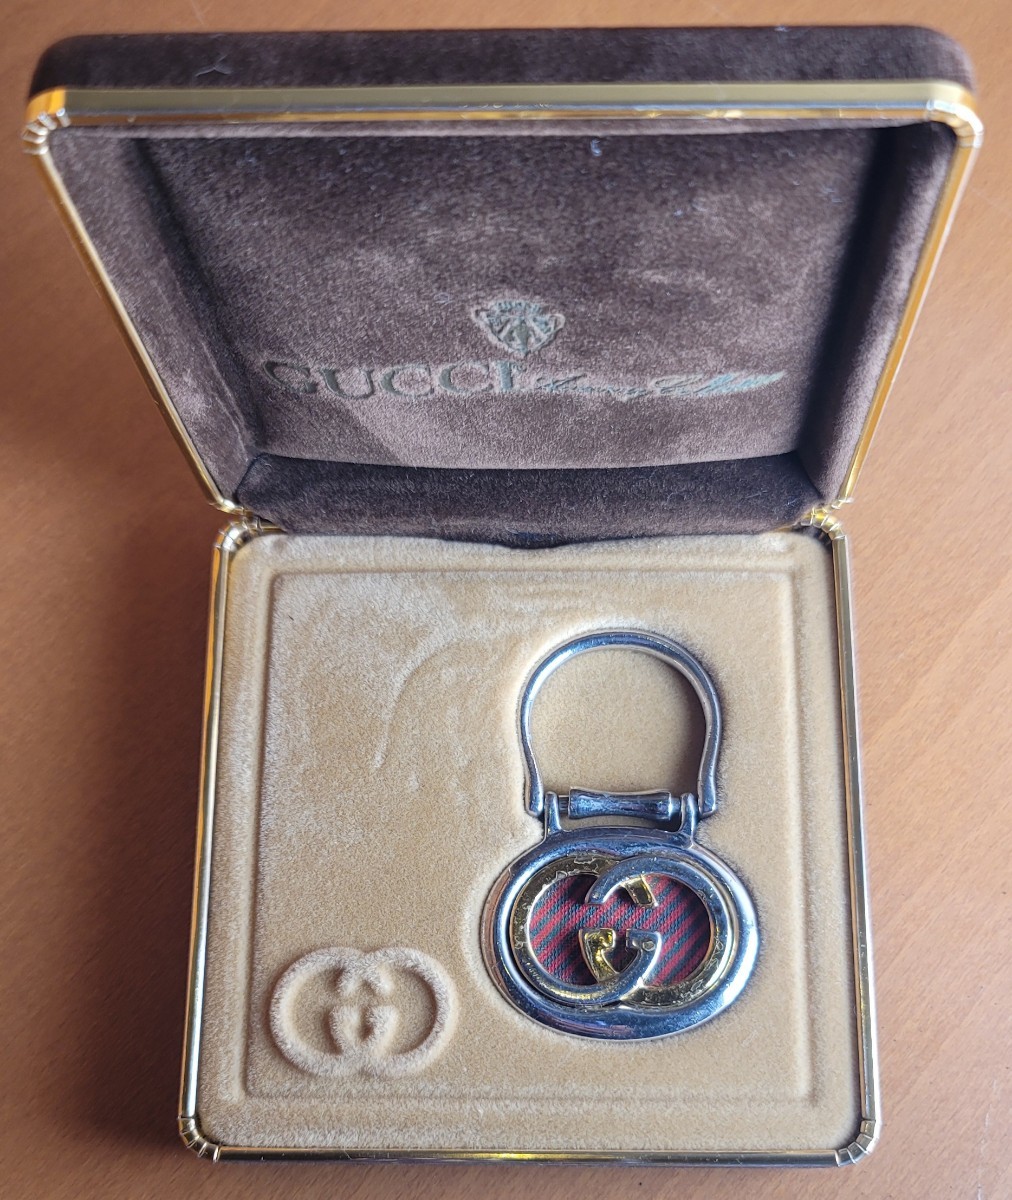 GUCCI Old Gucci key holder silver Gold combination color box attaching used present condition goods 